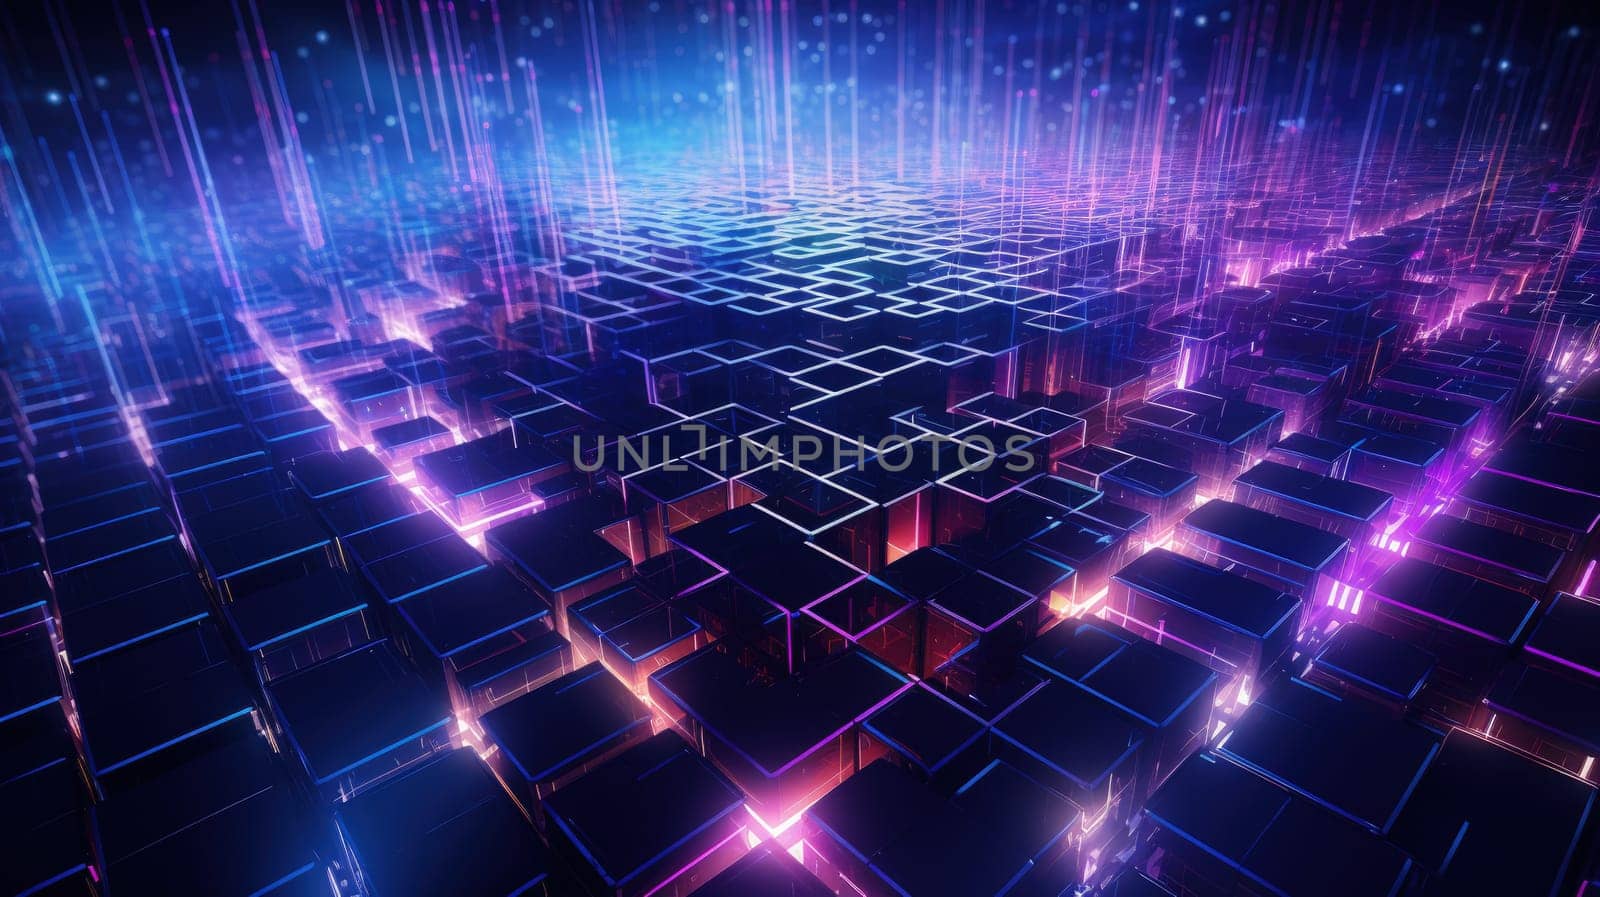 A futuristic crypto web rendered in 3D digital illustration, featuring cascading geometric patterns of interconnected blockchain nodes by Kadula